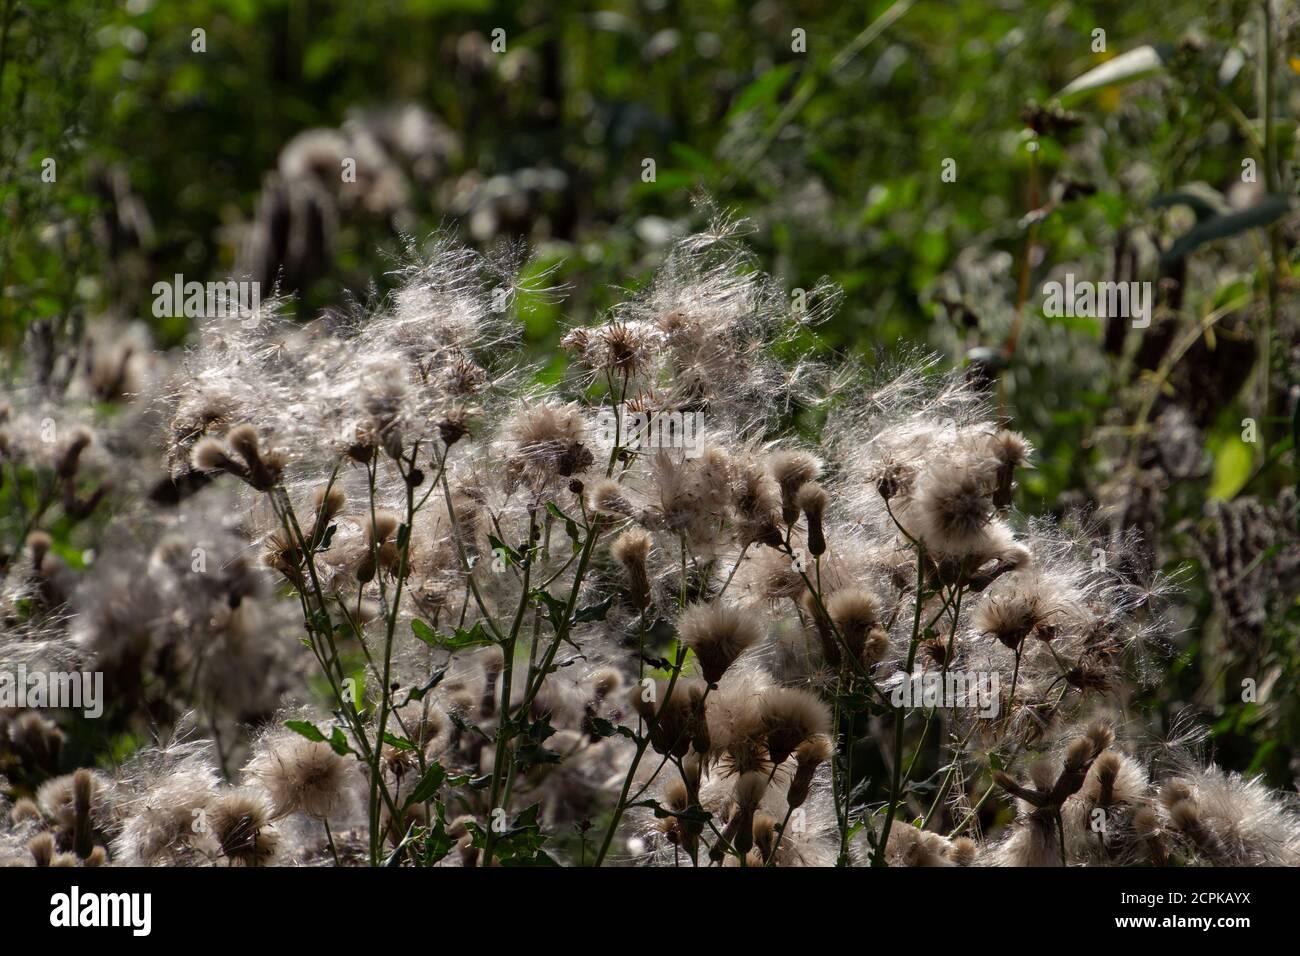 Close up of seeds of a creeping thistle, also called Cirsium arvense or Acker Kratzdistel Stock Photo